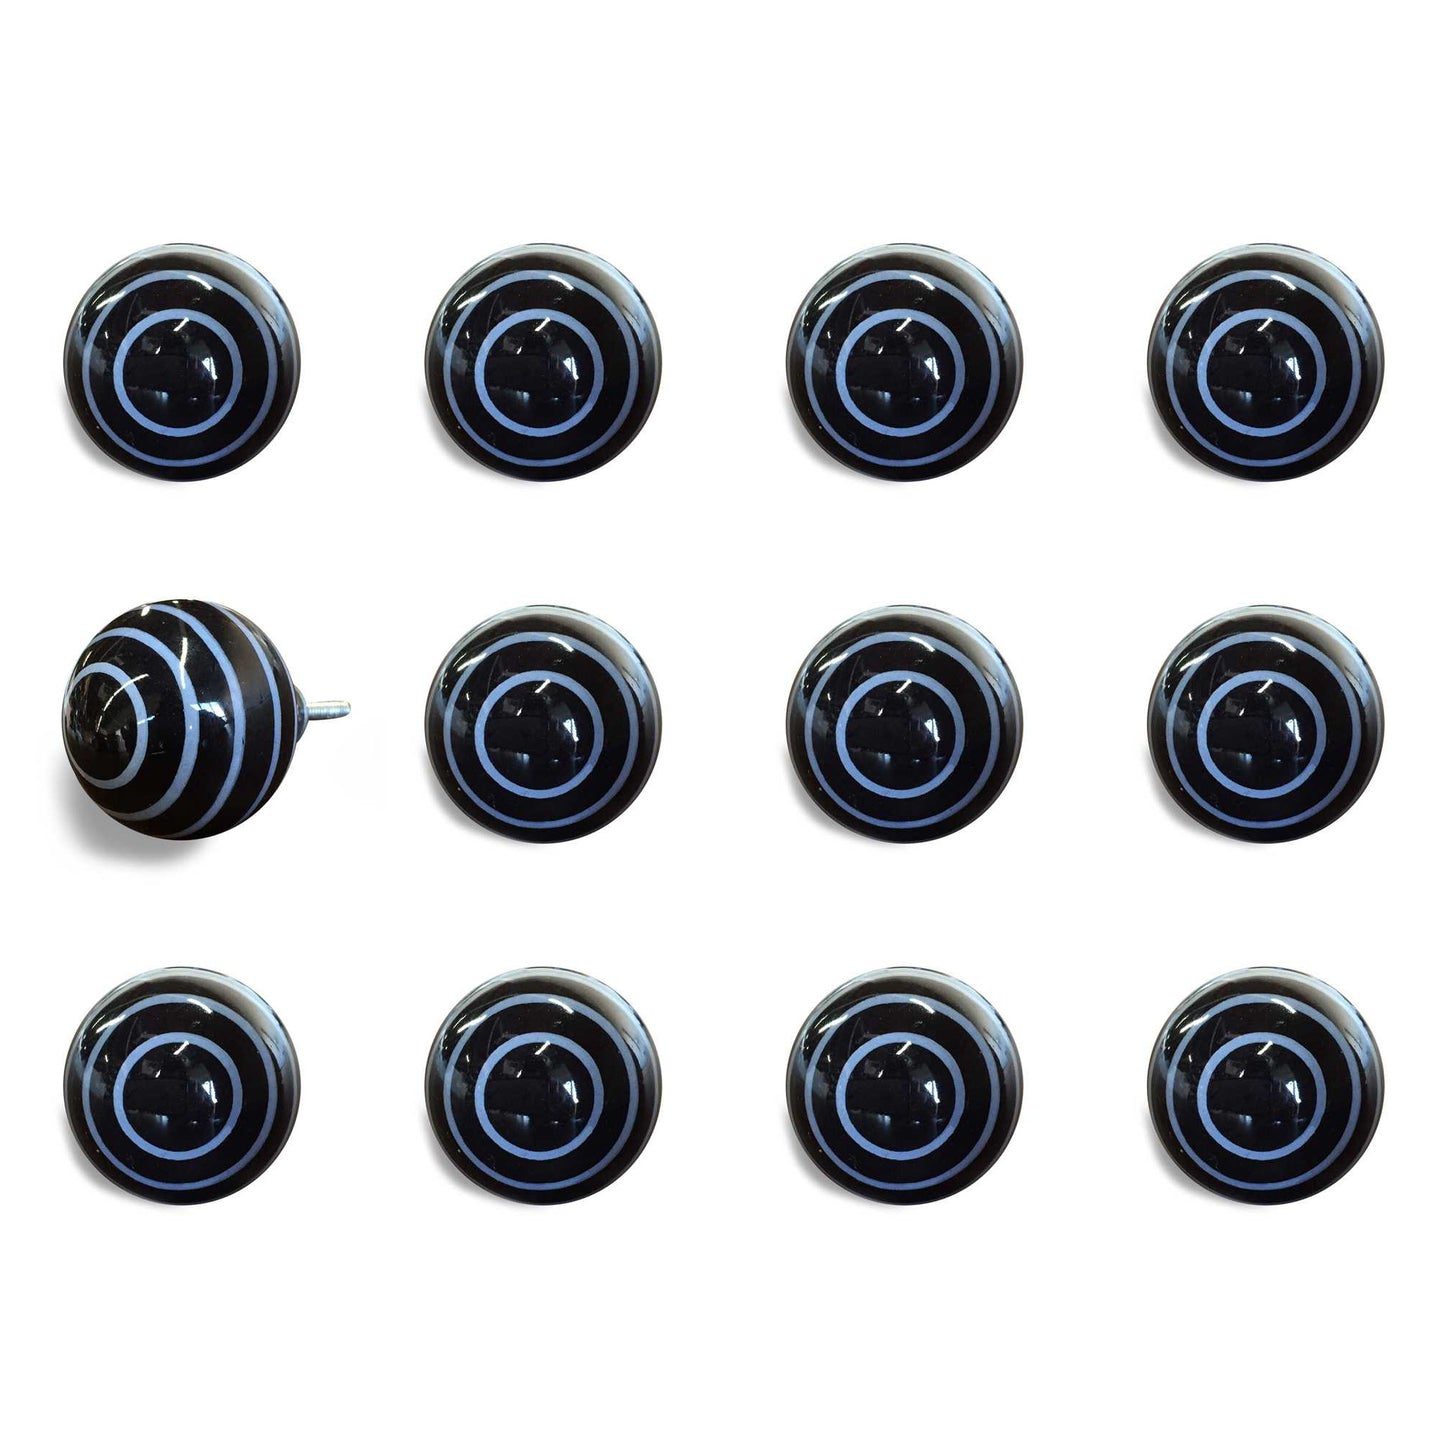 1.5" X 1.5" X 1.5" Black And Light Blue Knobs 12 Pack